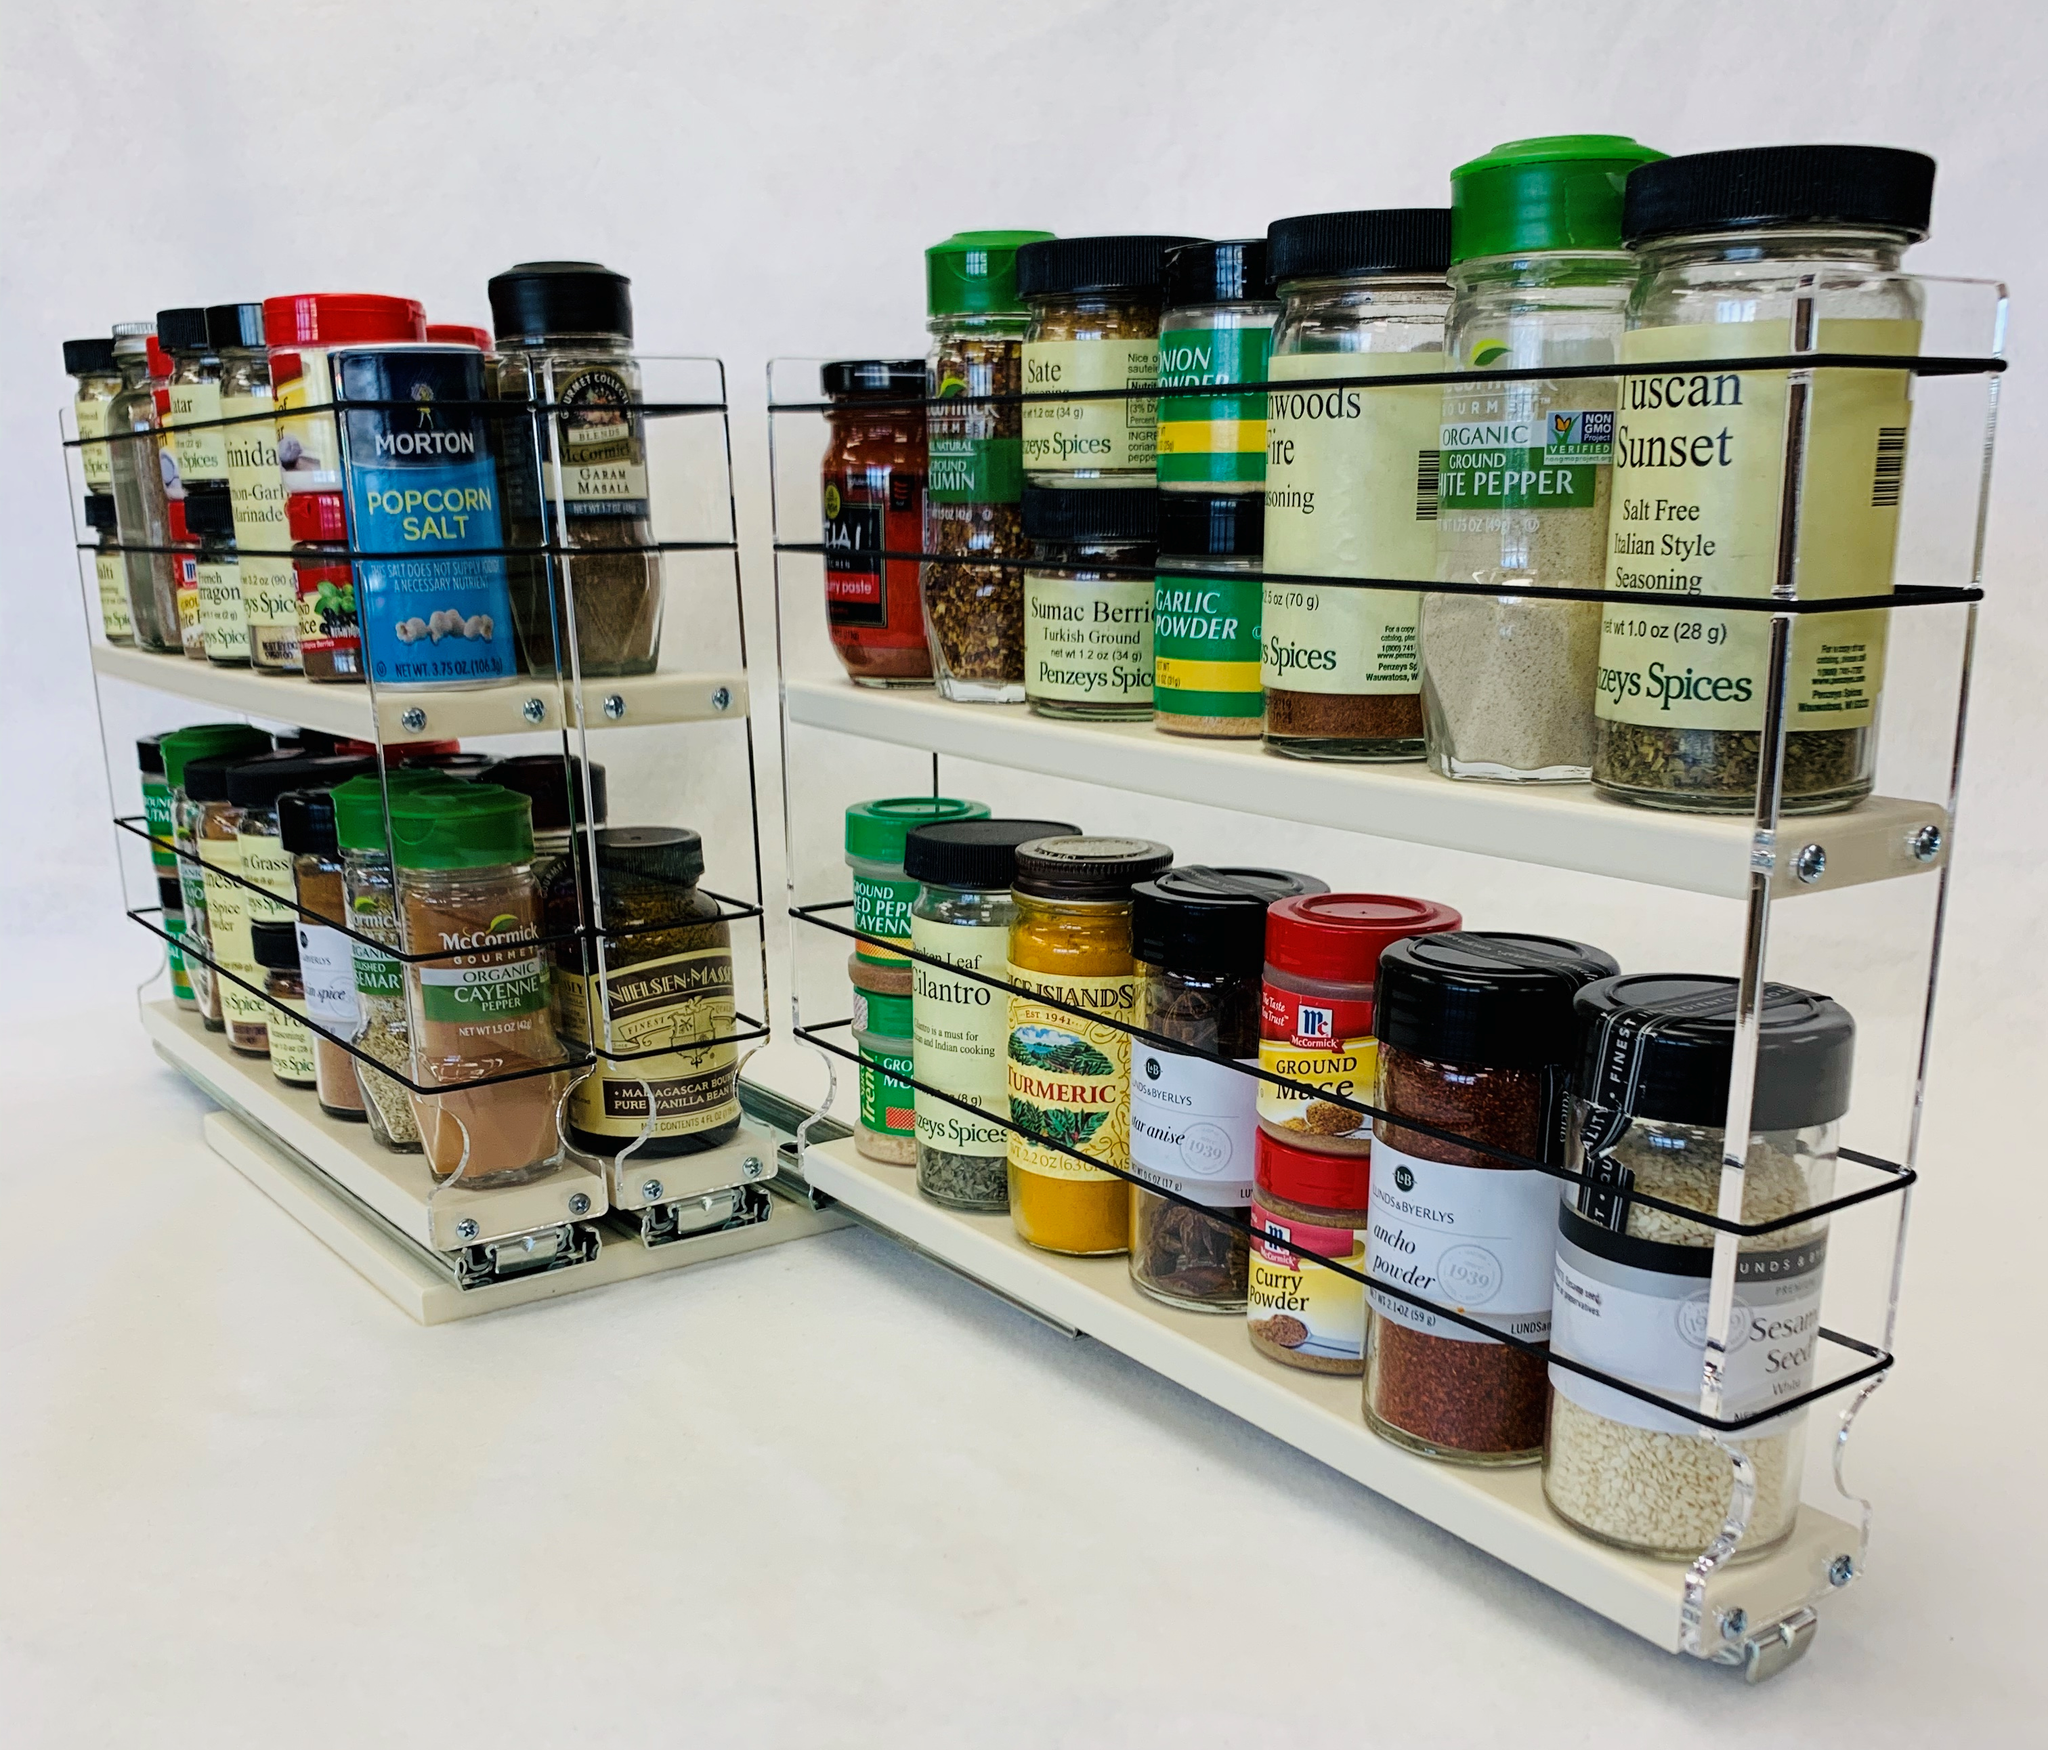 This $17 Drawer Organizer Is the Best Way to Store Spices